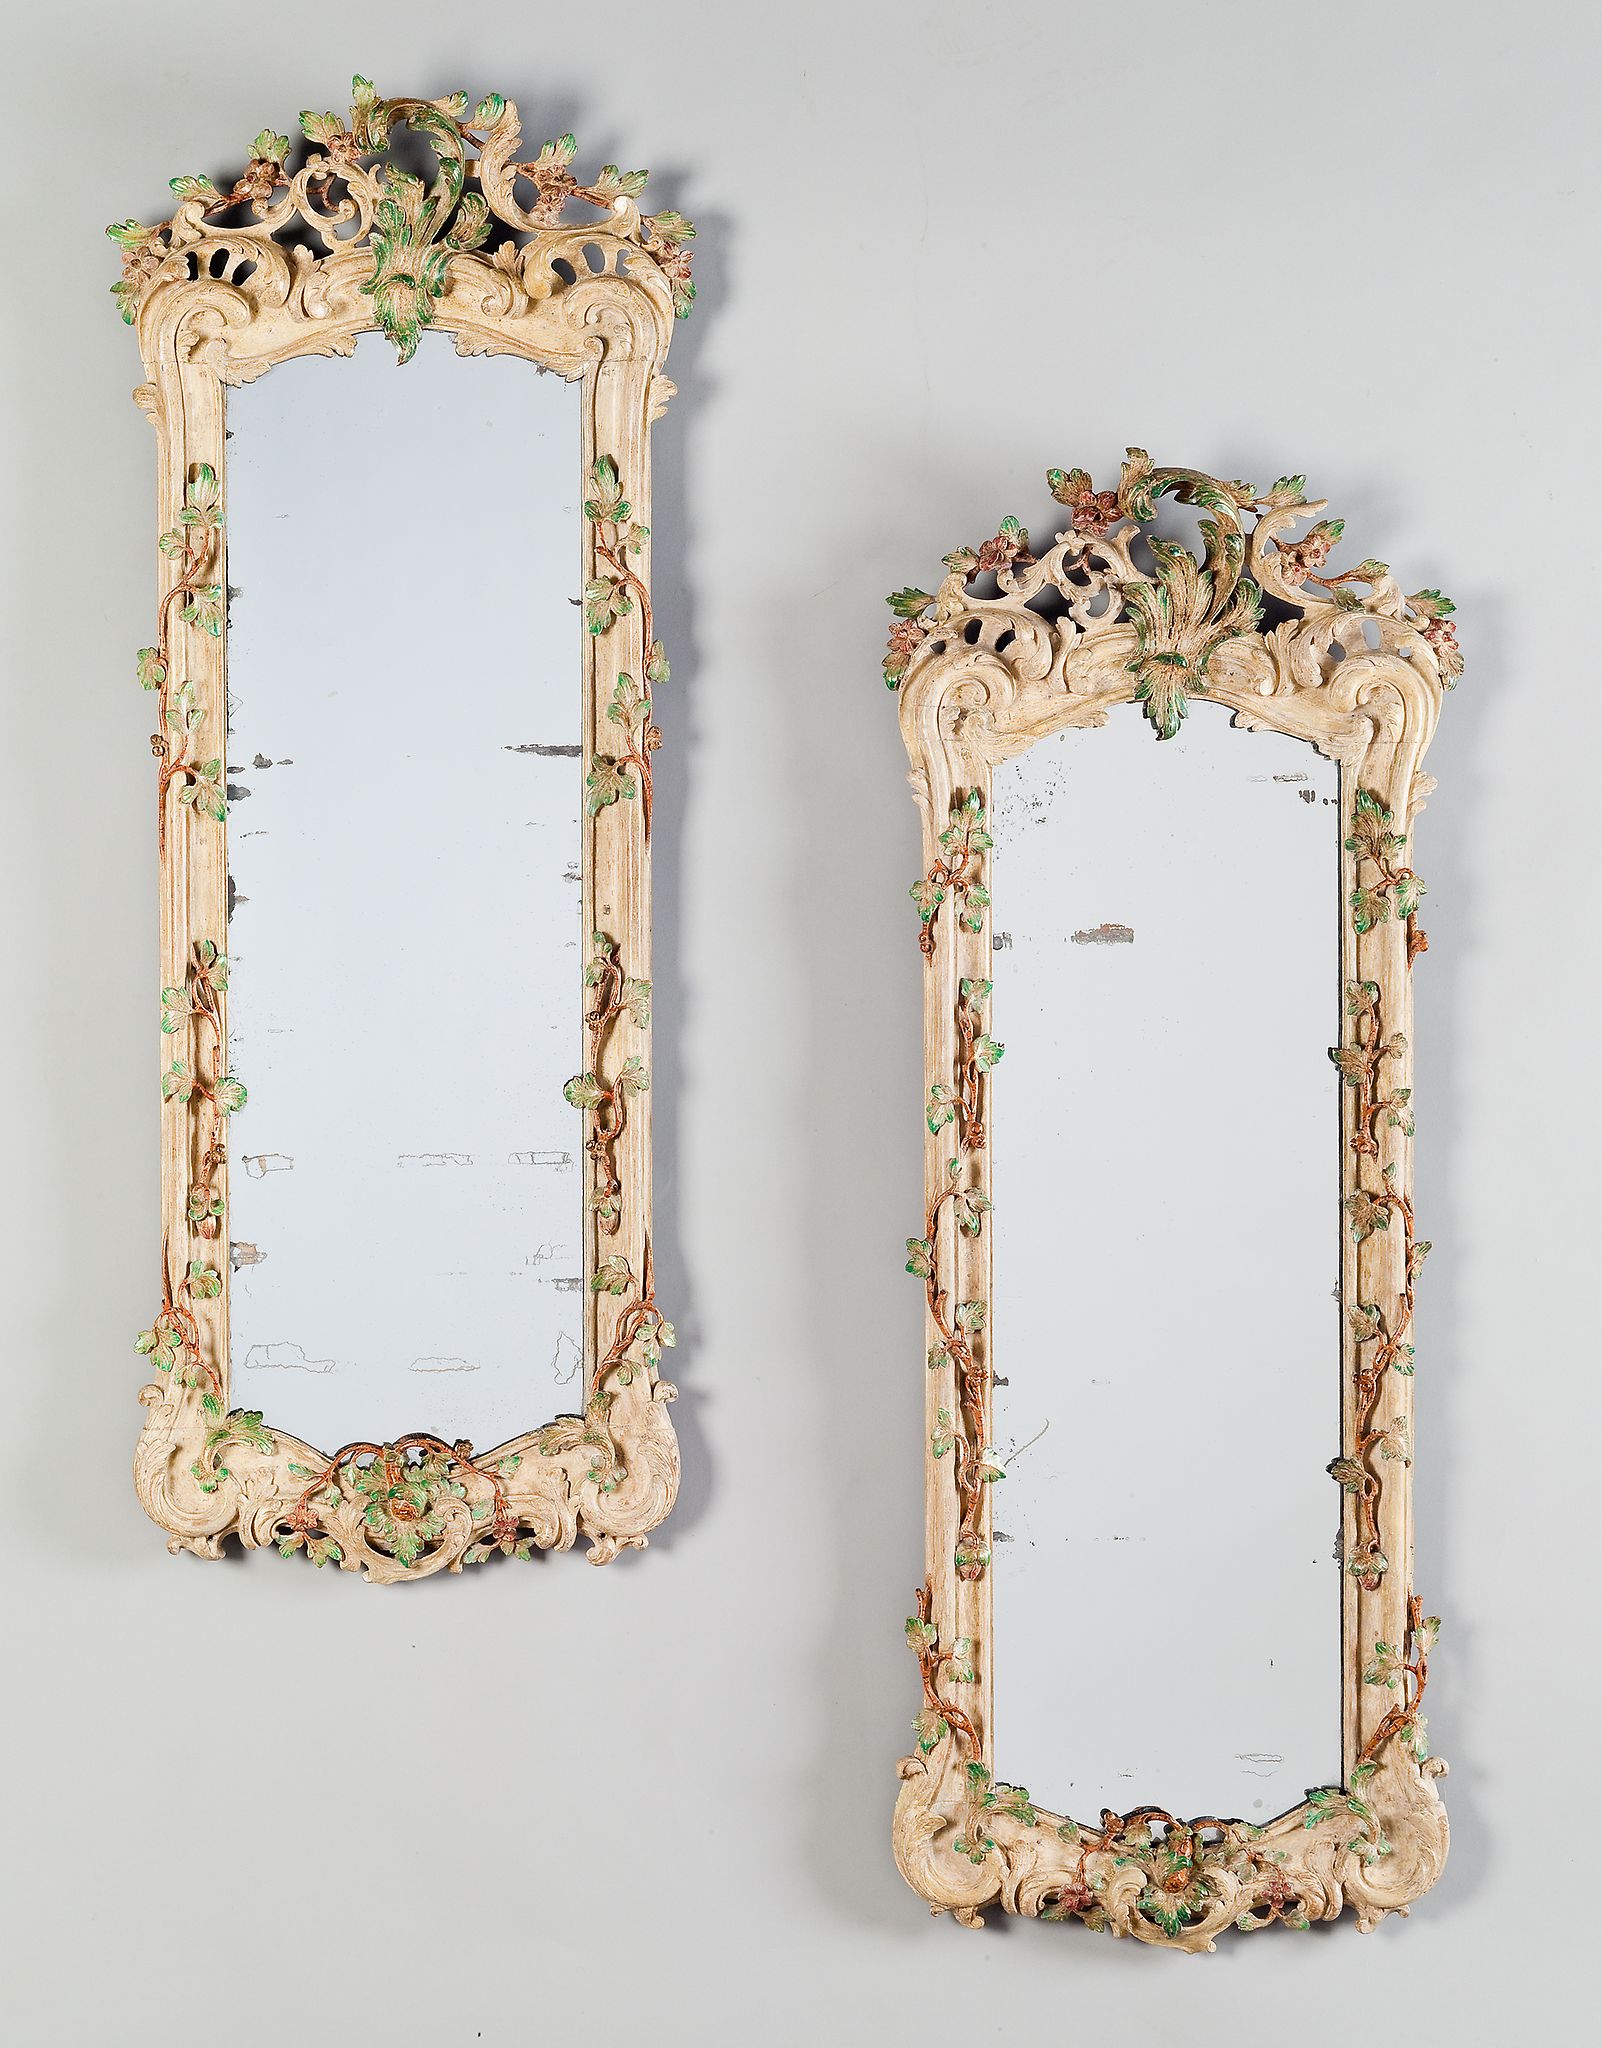 A Pair of 18th Century Painted German Rococo Girandoles carved with high relief scrolls forming a